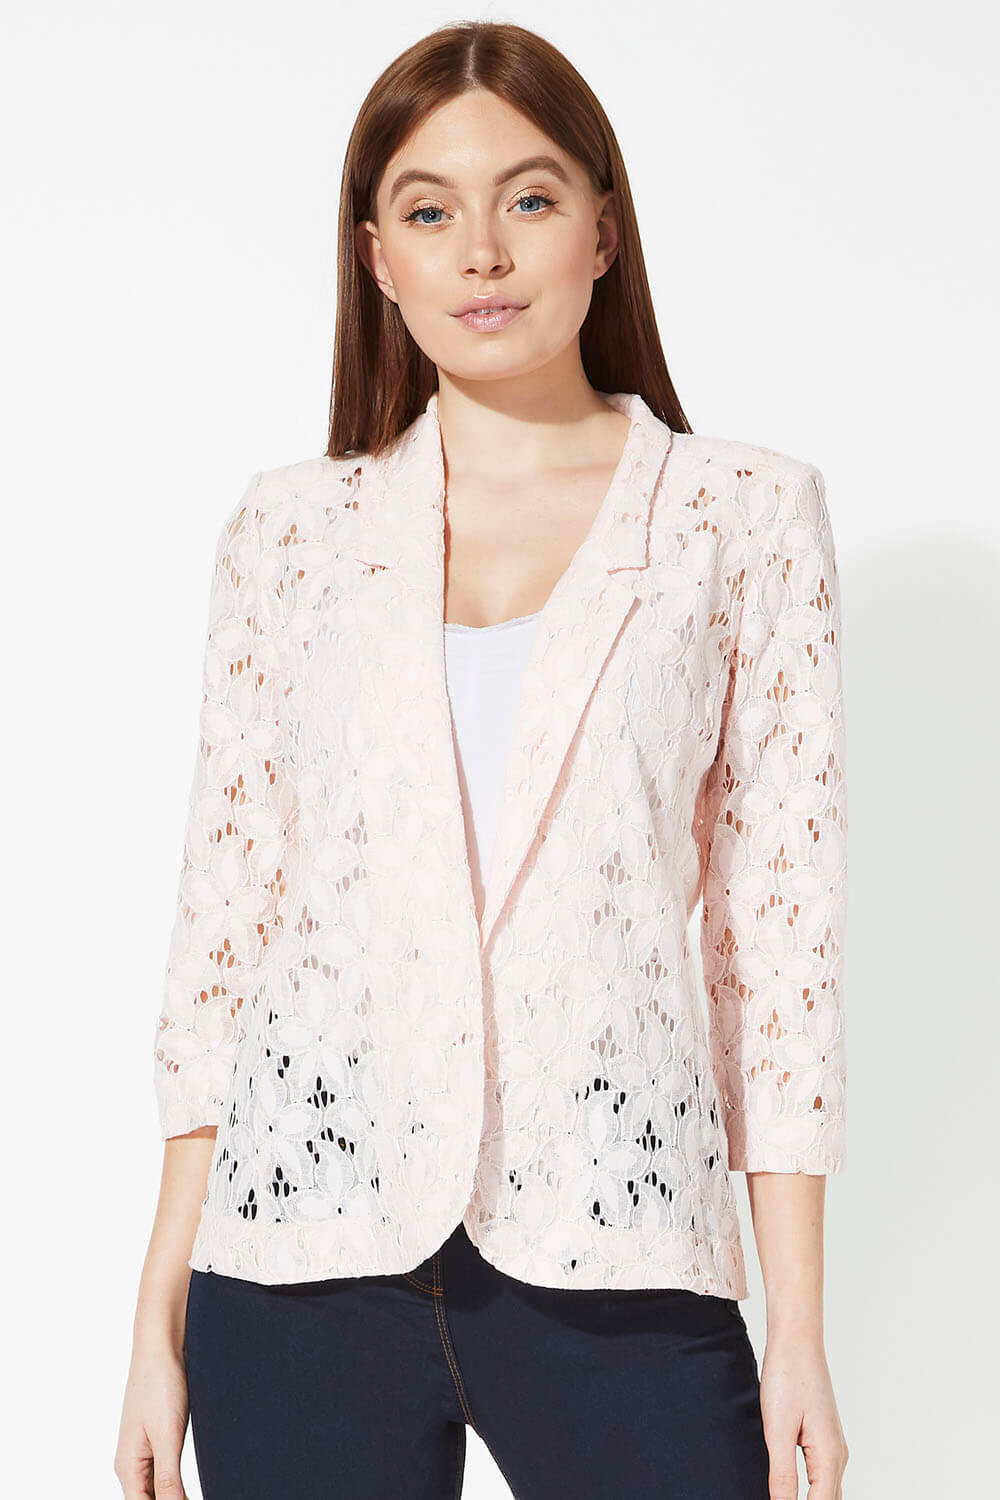 PINK Floral Lace 3/4 Sleeve Jacket, Image 4 of 4